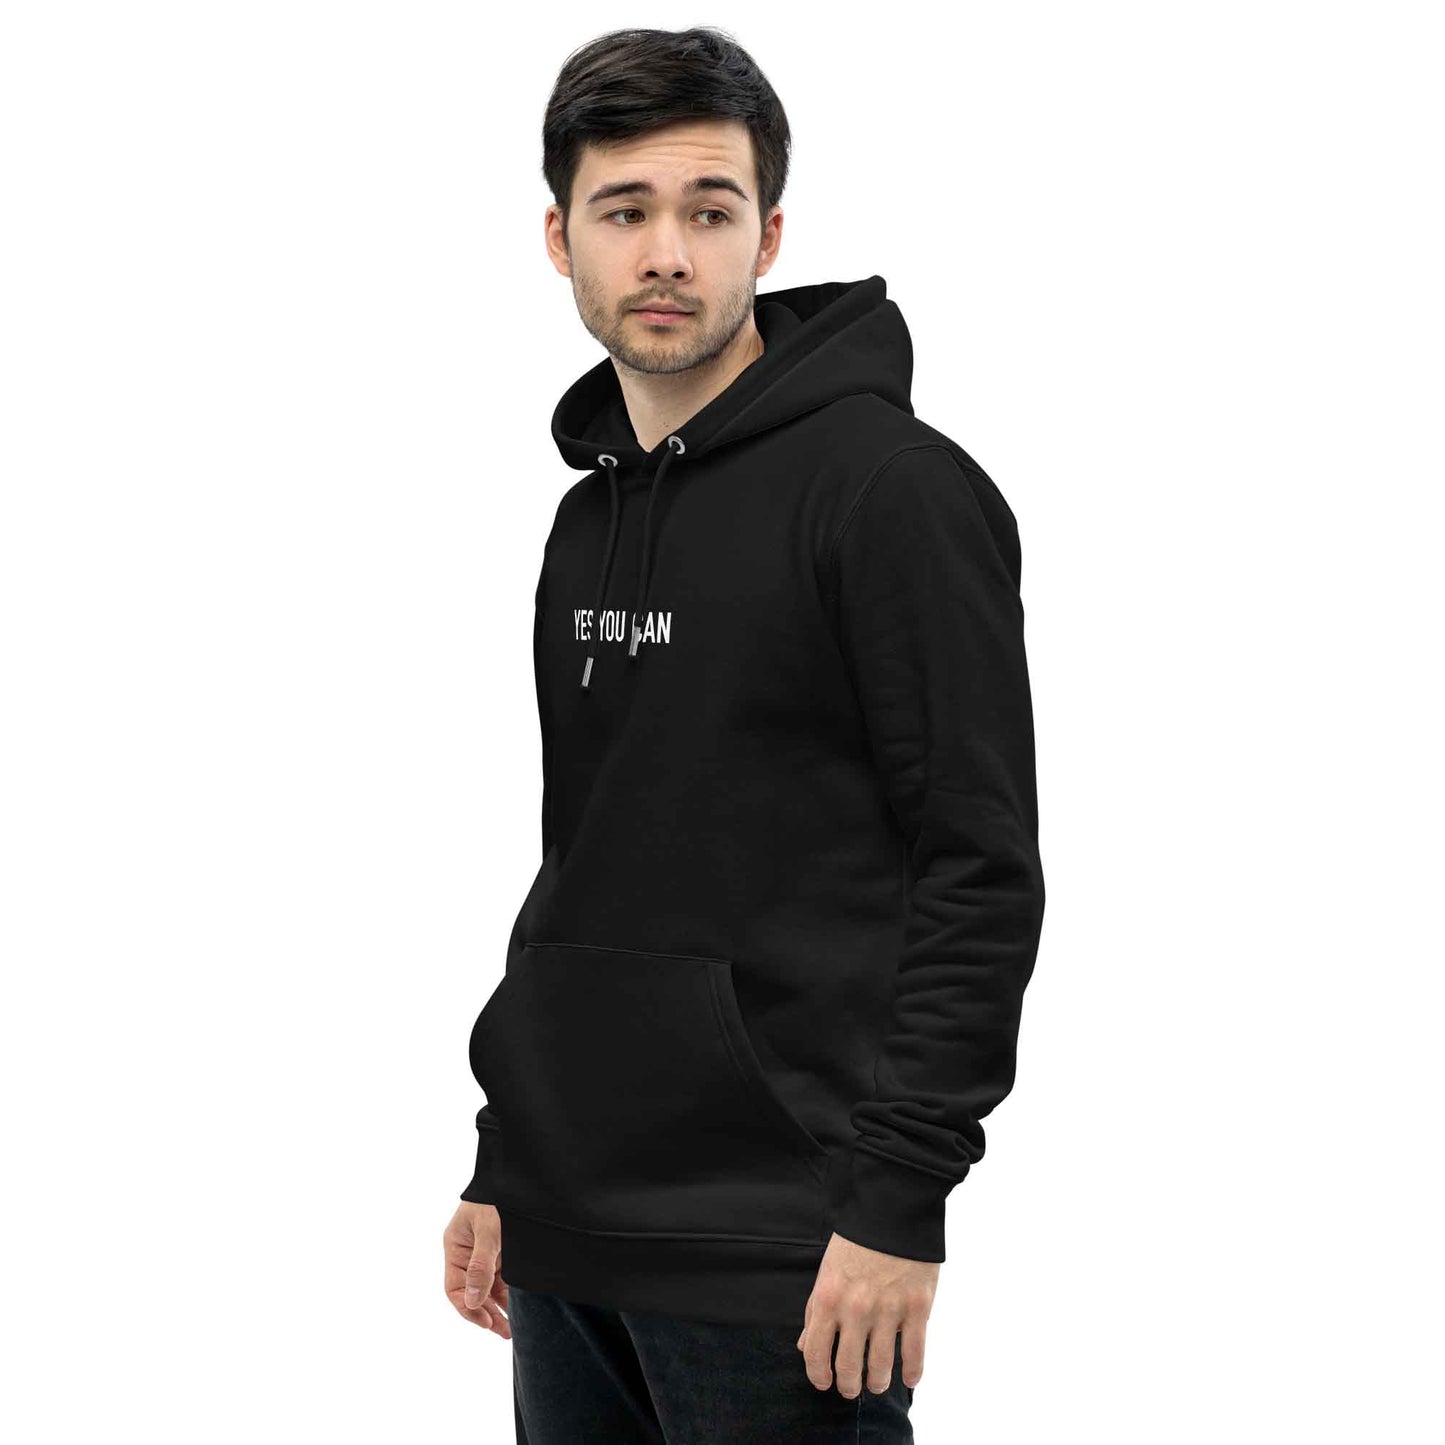 Men black motivational hoodie with inspirational quote, "Yes You Can."